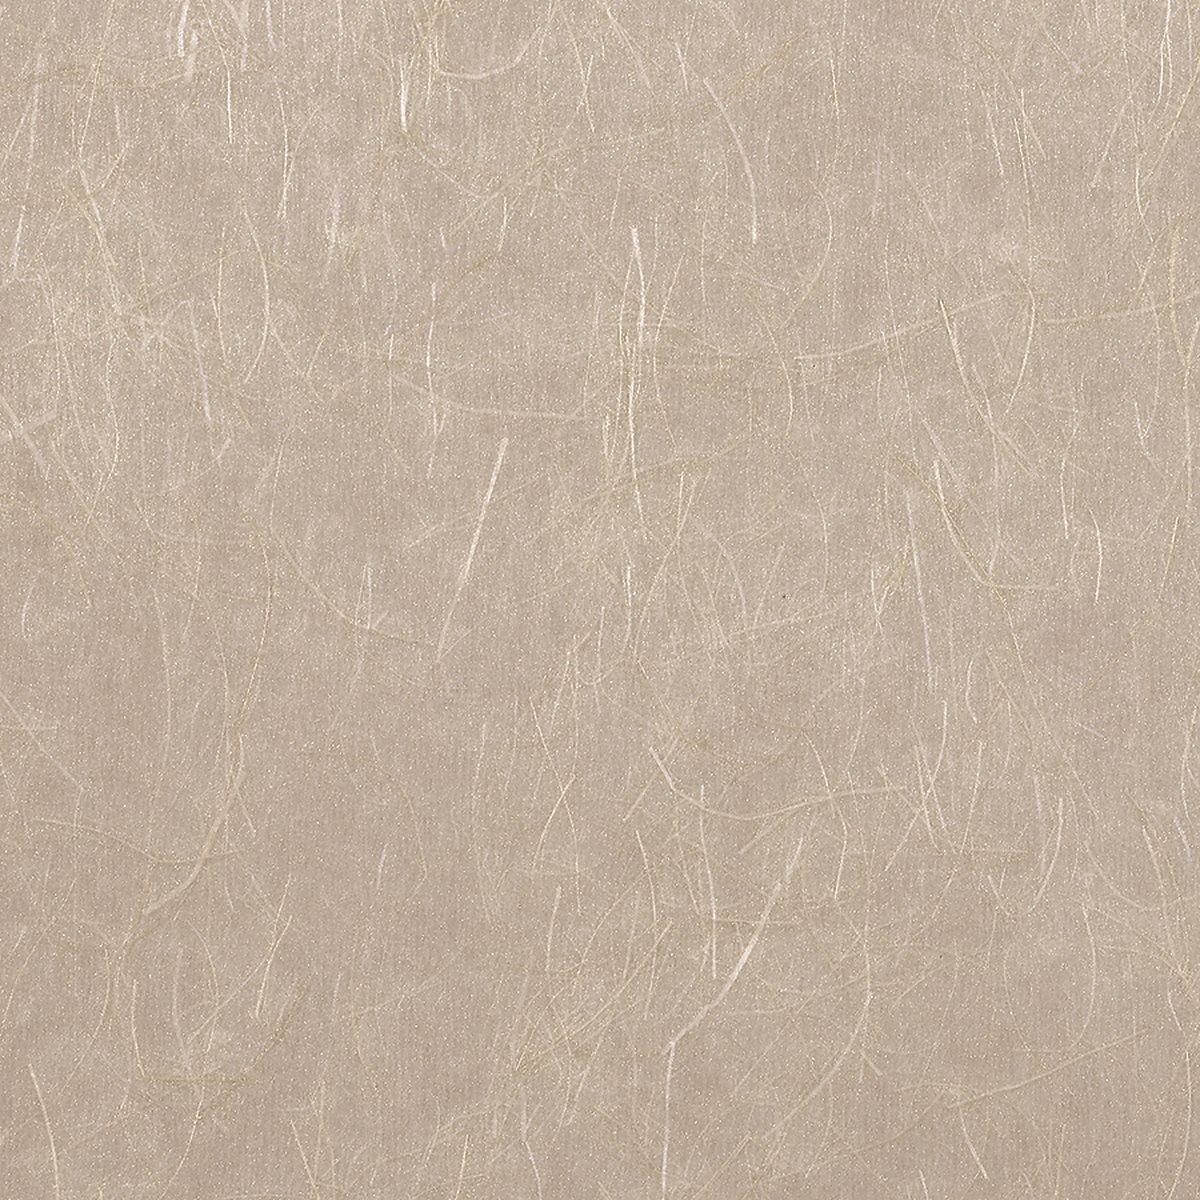 Advantage Cain White Rice Texture Paper Textured NonPasted Wallpaper Roll  4096520828  The Home Depot